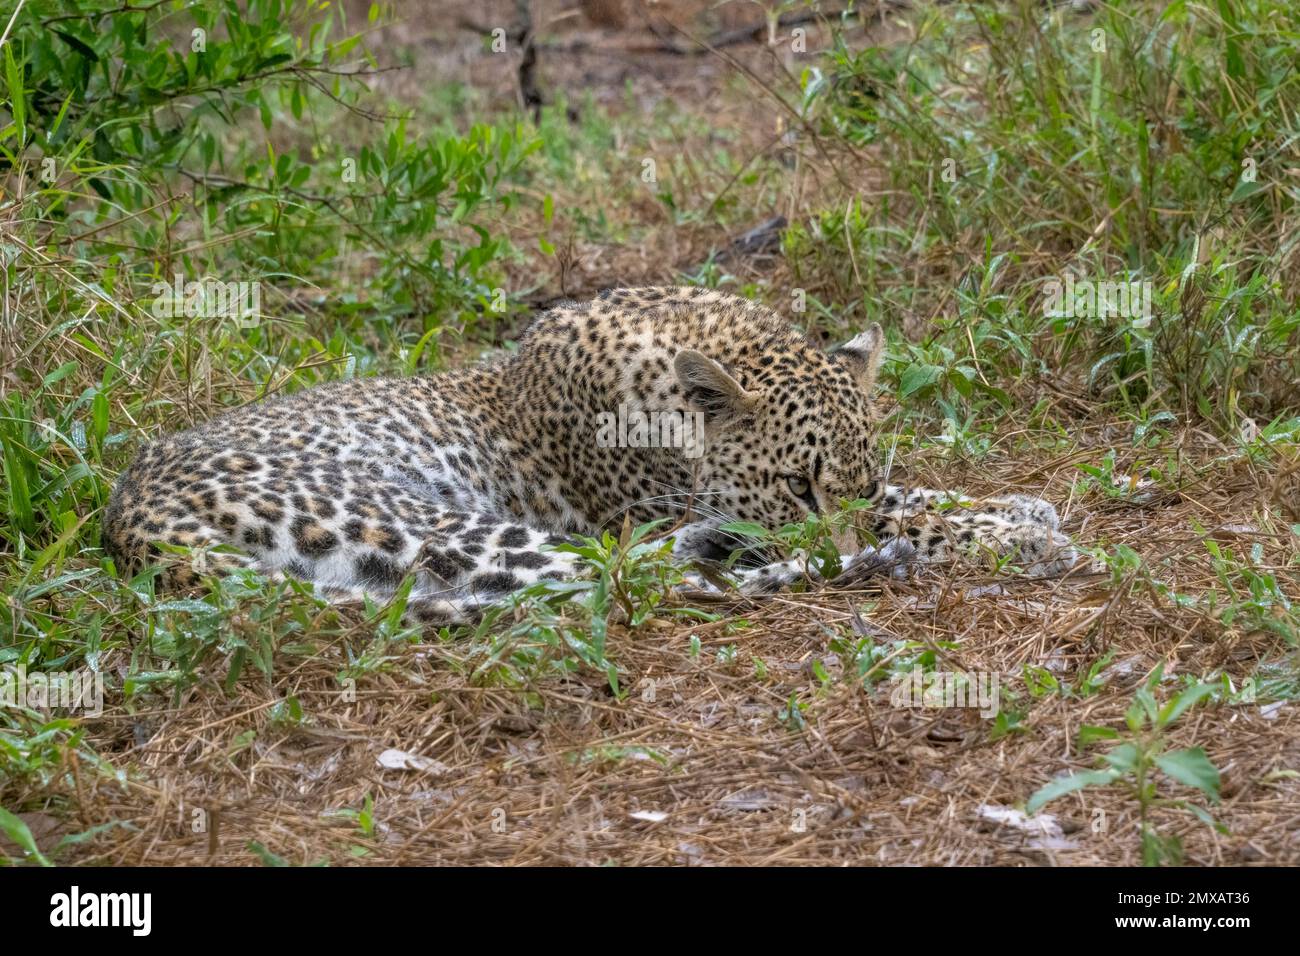 Young Female Leopard with Diamond Droplets of Rain in her Fur Stock Photo